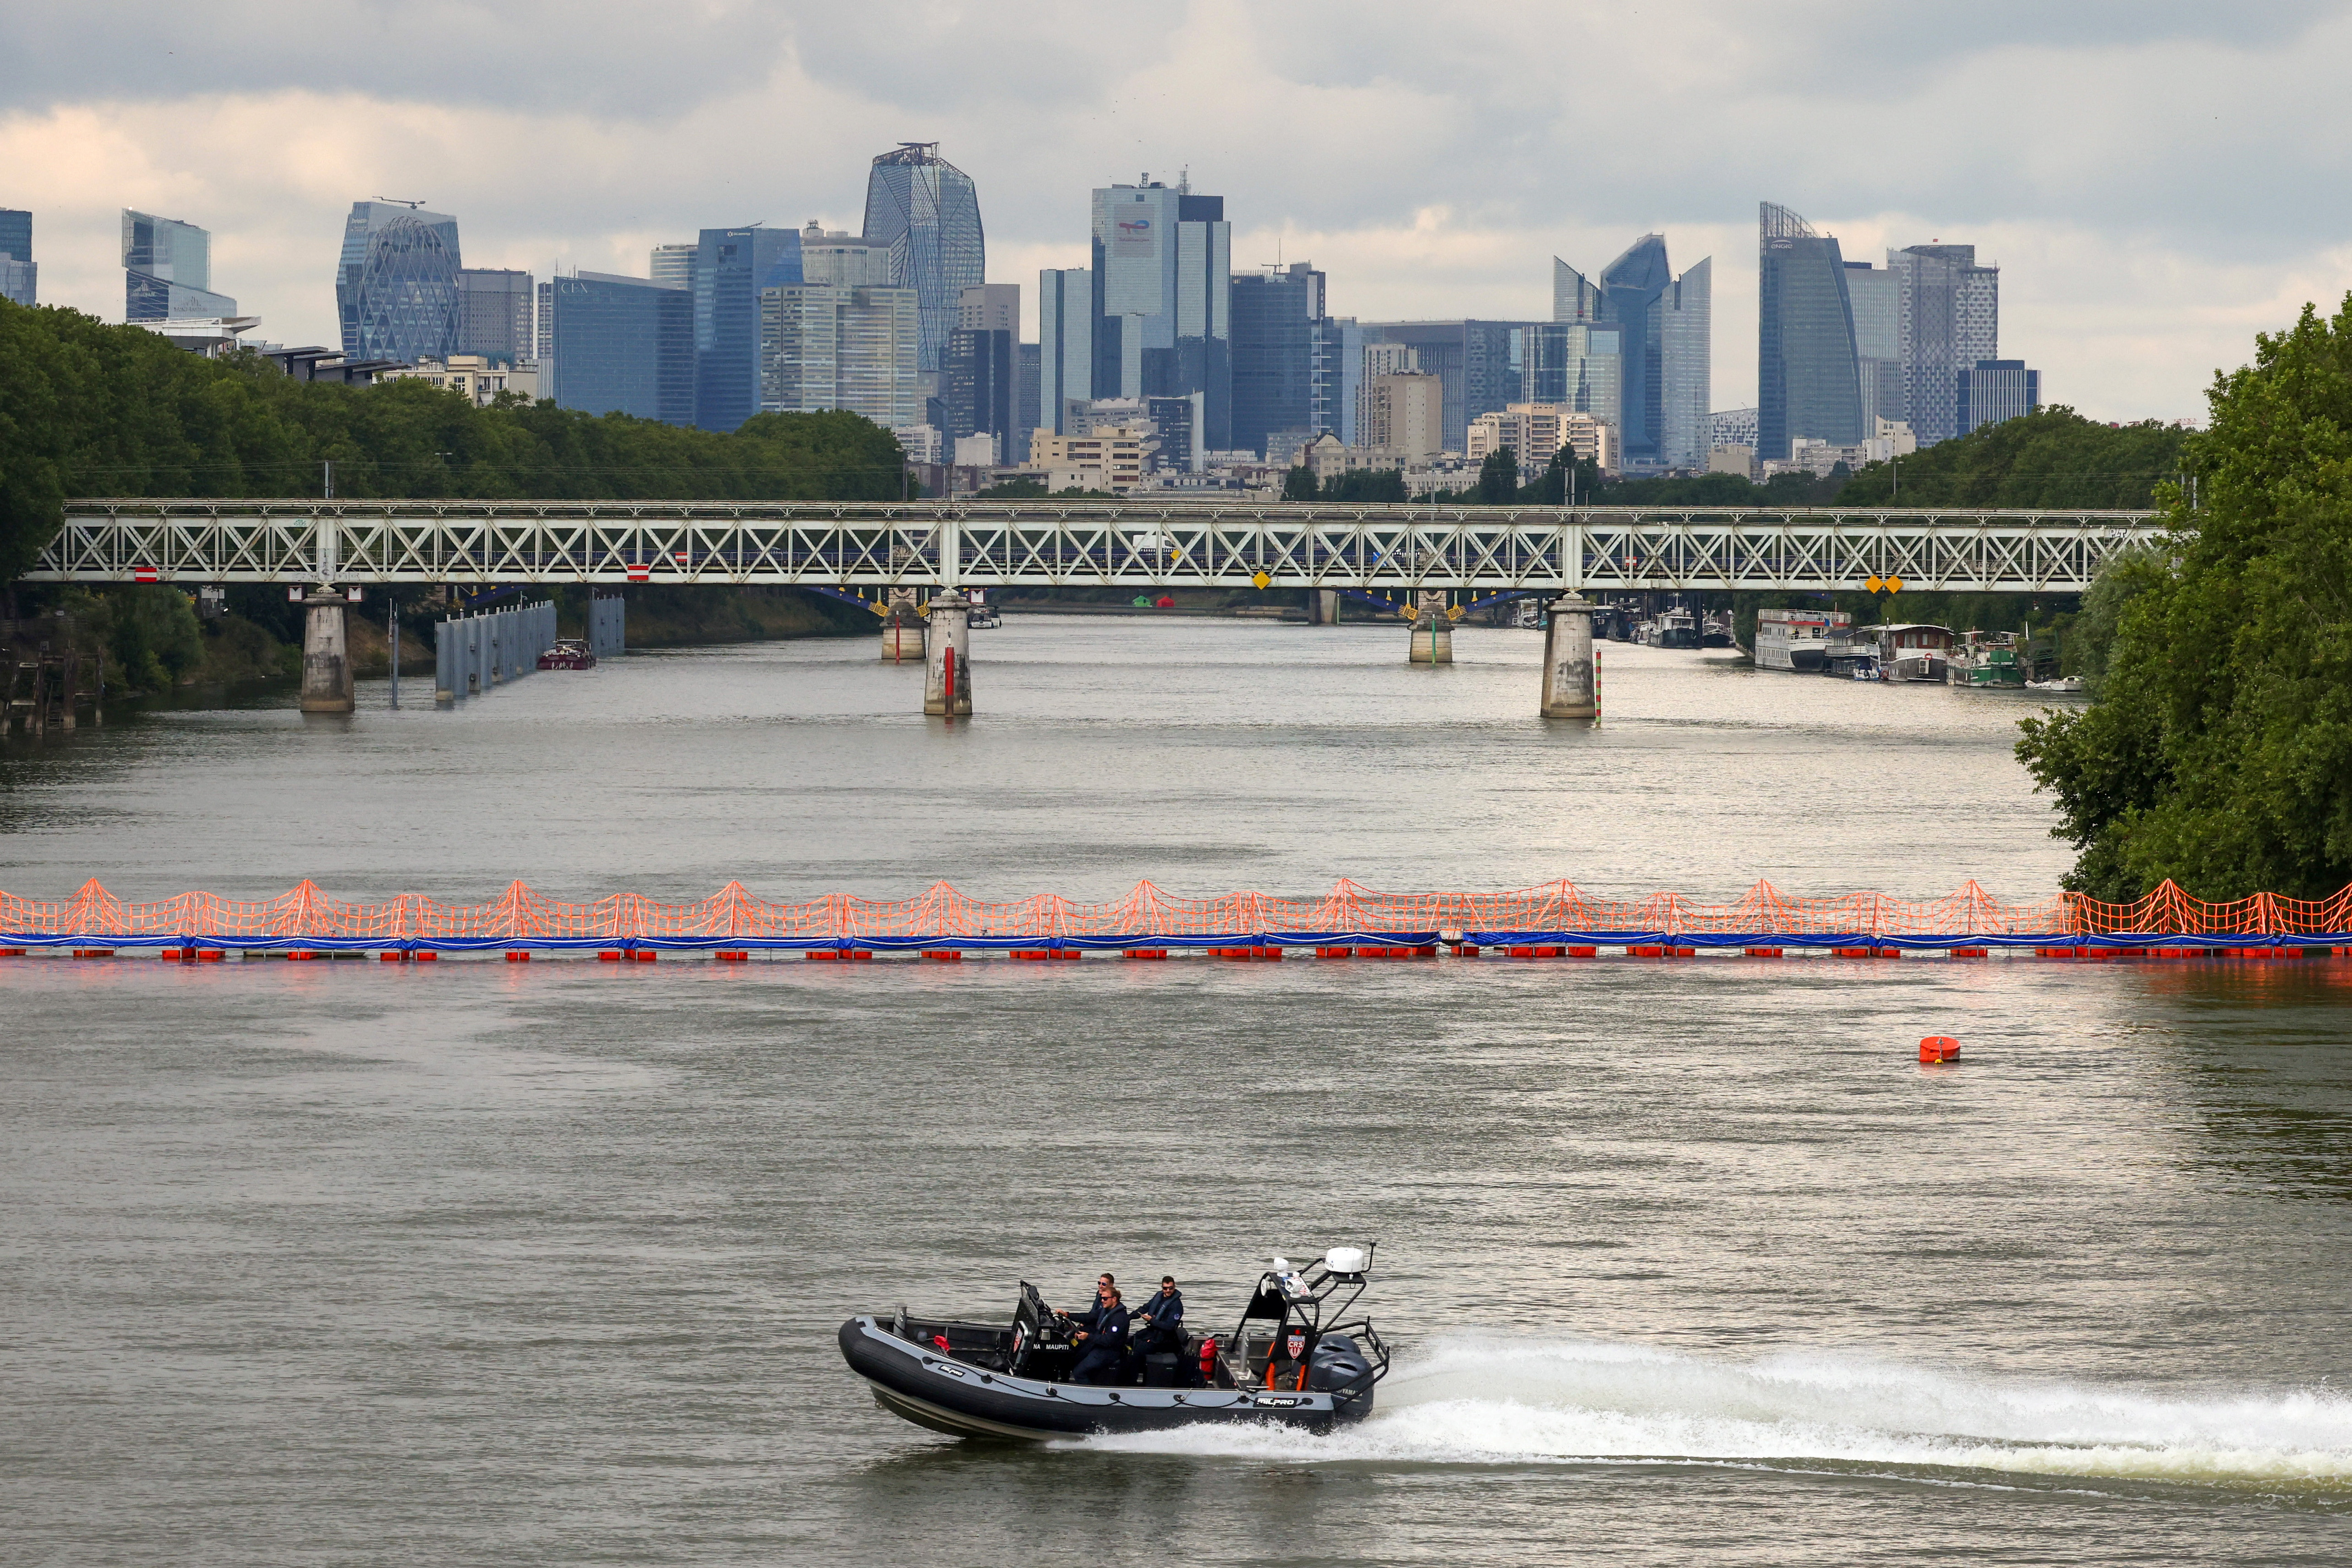 A CRS police speedboat patrols on the River Seine near a floating barrier